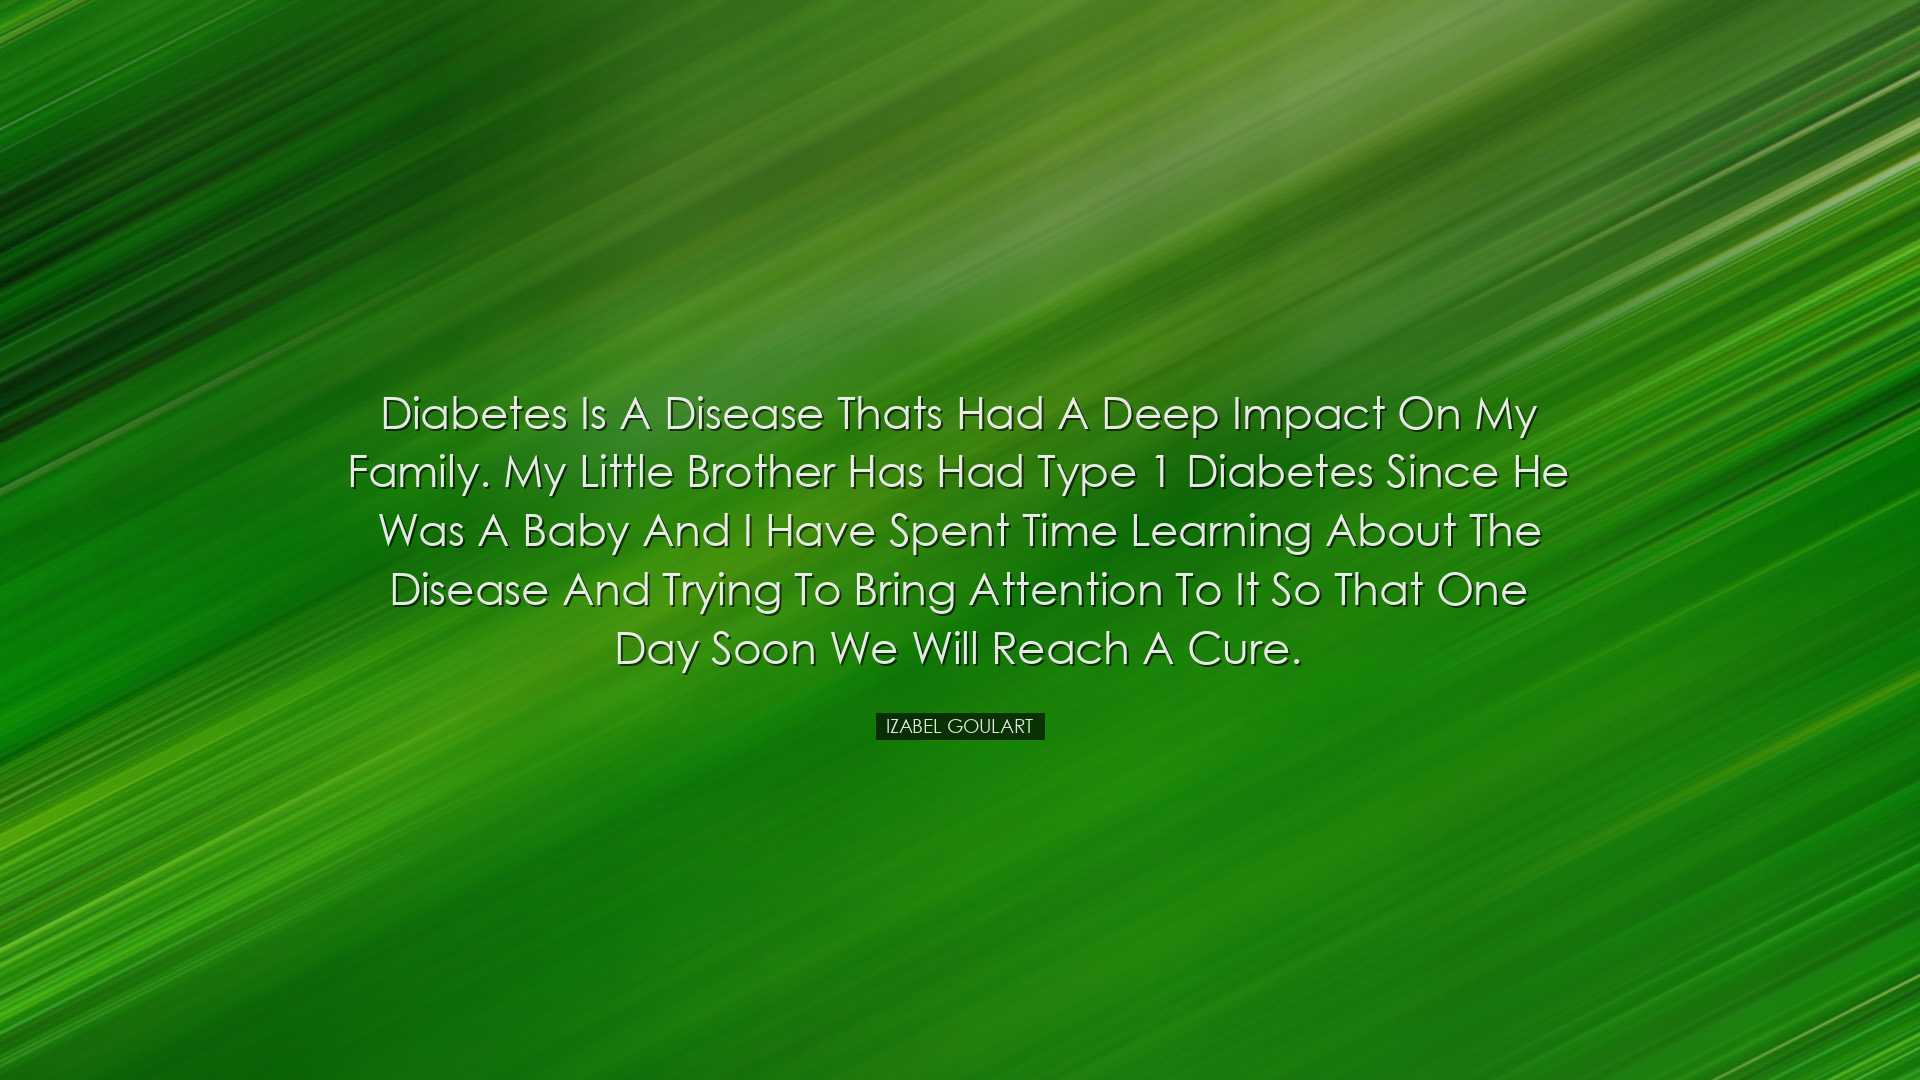 Diabetes is a disease thats had a deep impact on my family. My lit